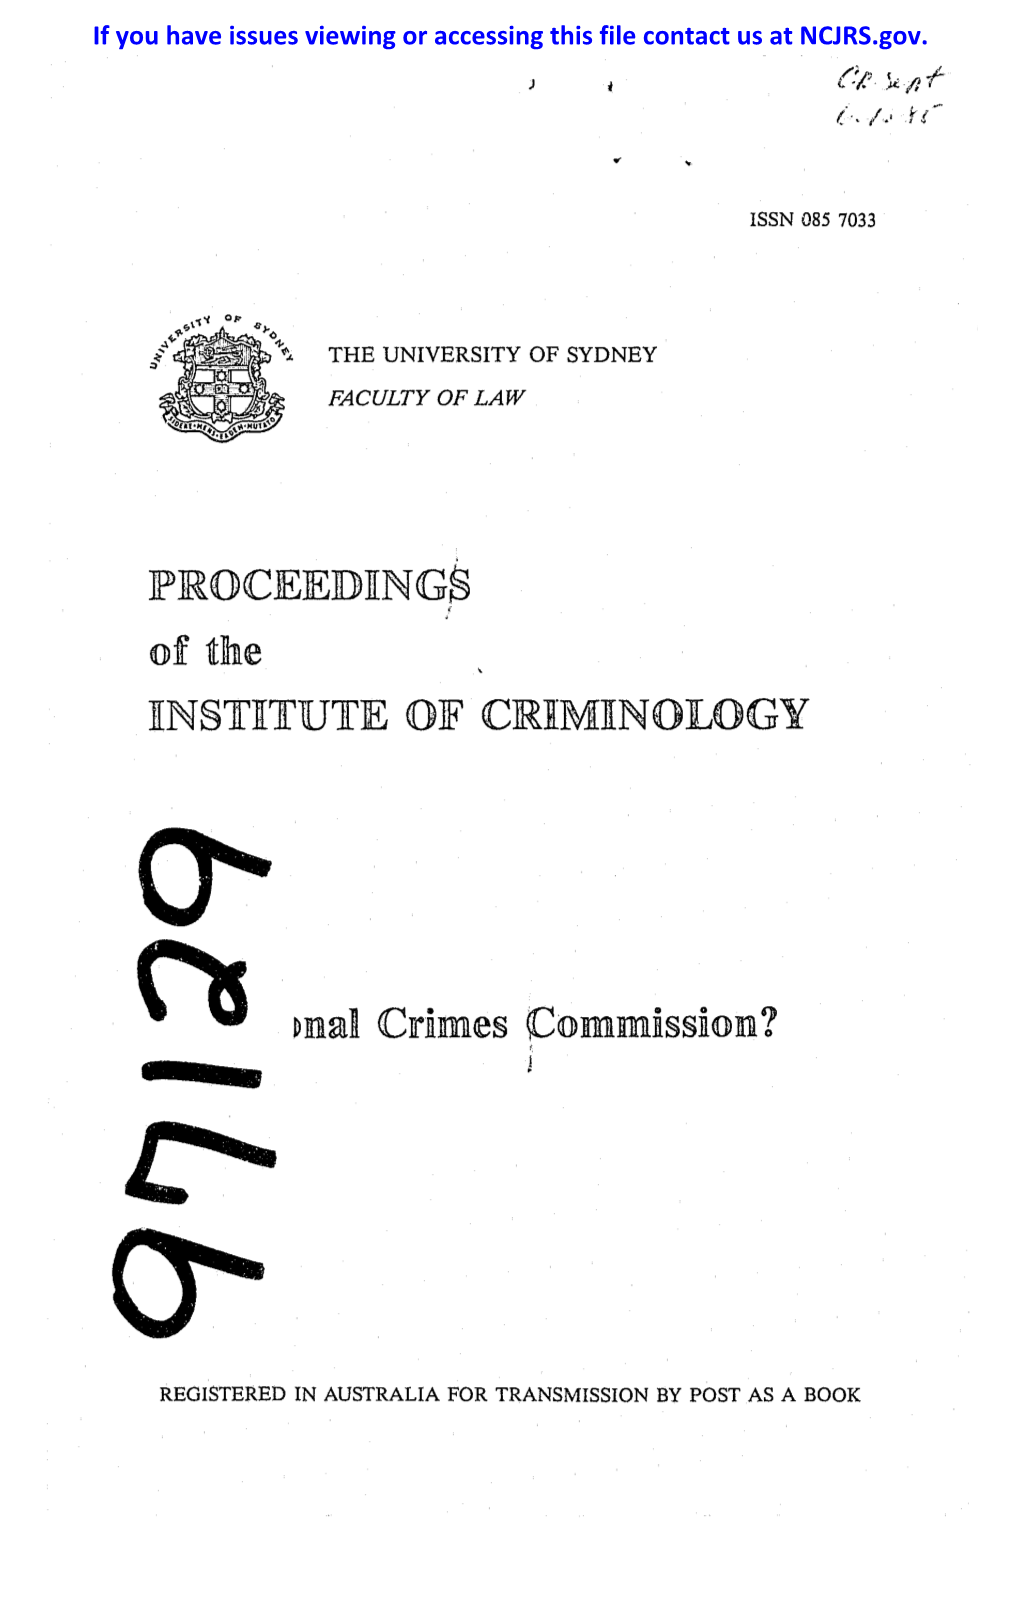 INSTITUTE of Cjrimlinology Dnal Crimes Commission?